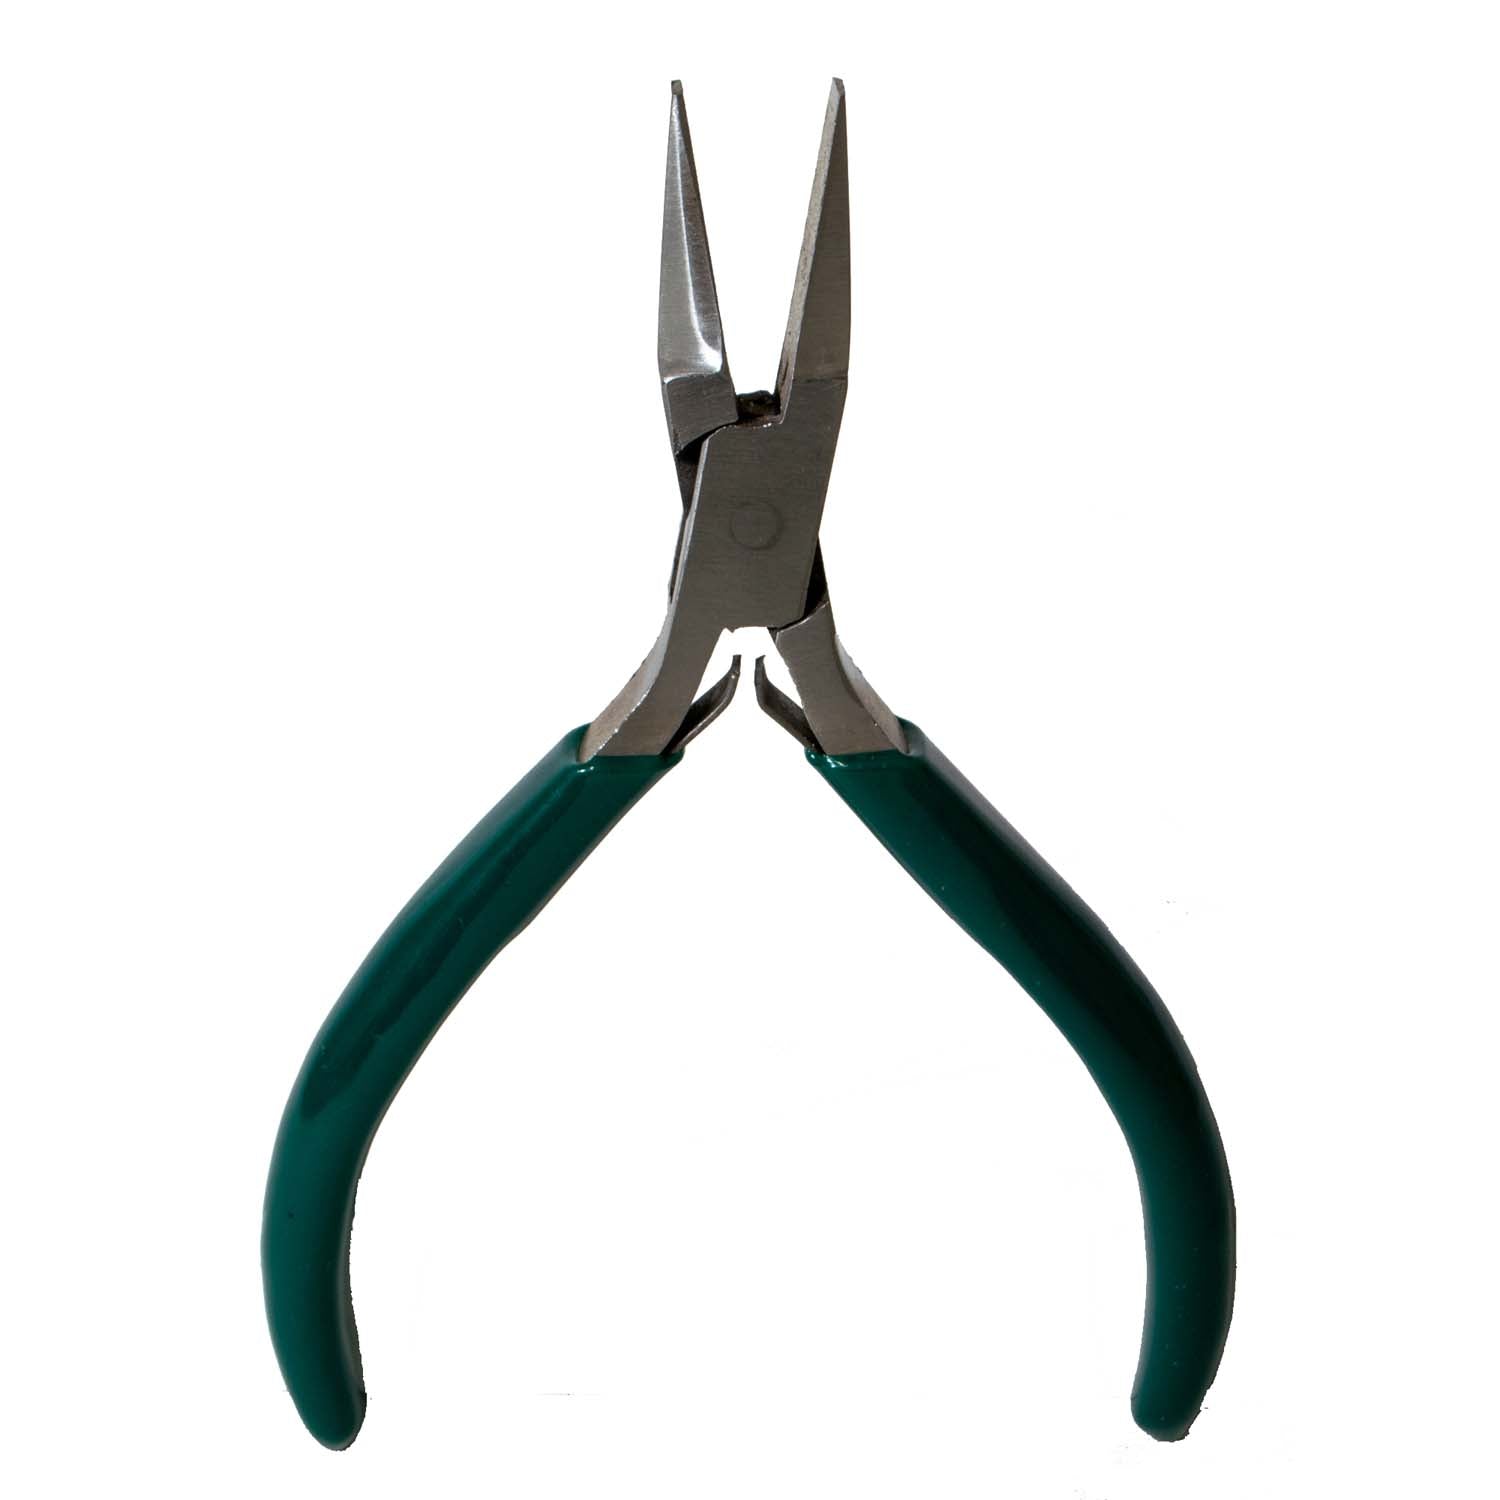 Snub-nose Pliers. 4.5 inches